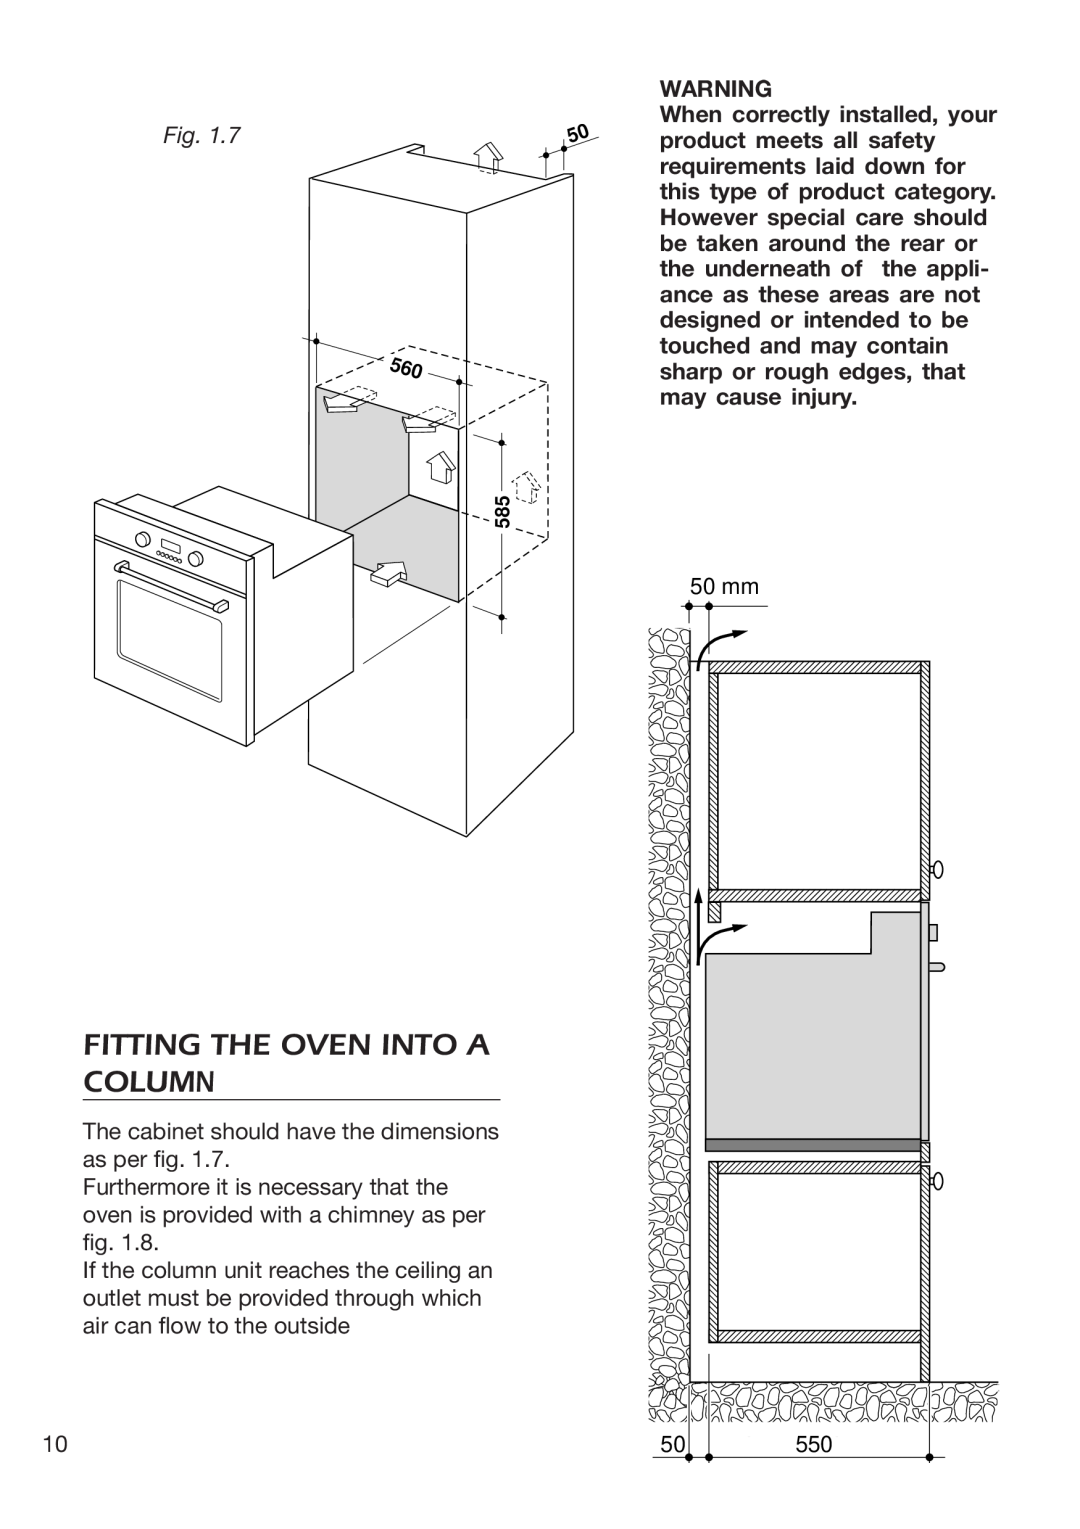 DeLonghi EMFPS 60 B manual Fitting The Oven Into A, Column 